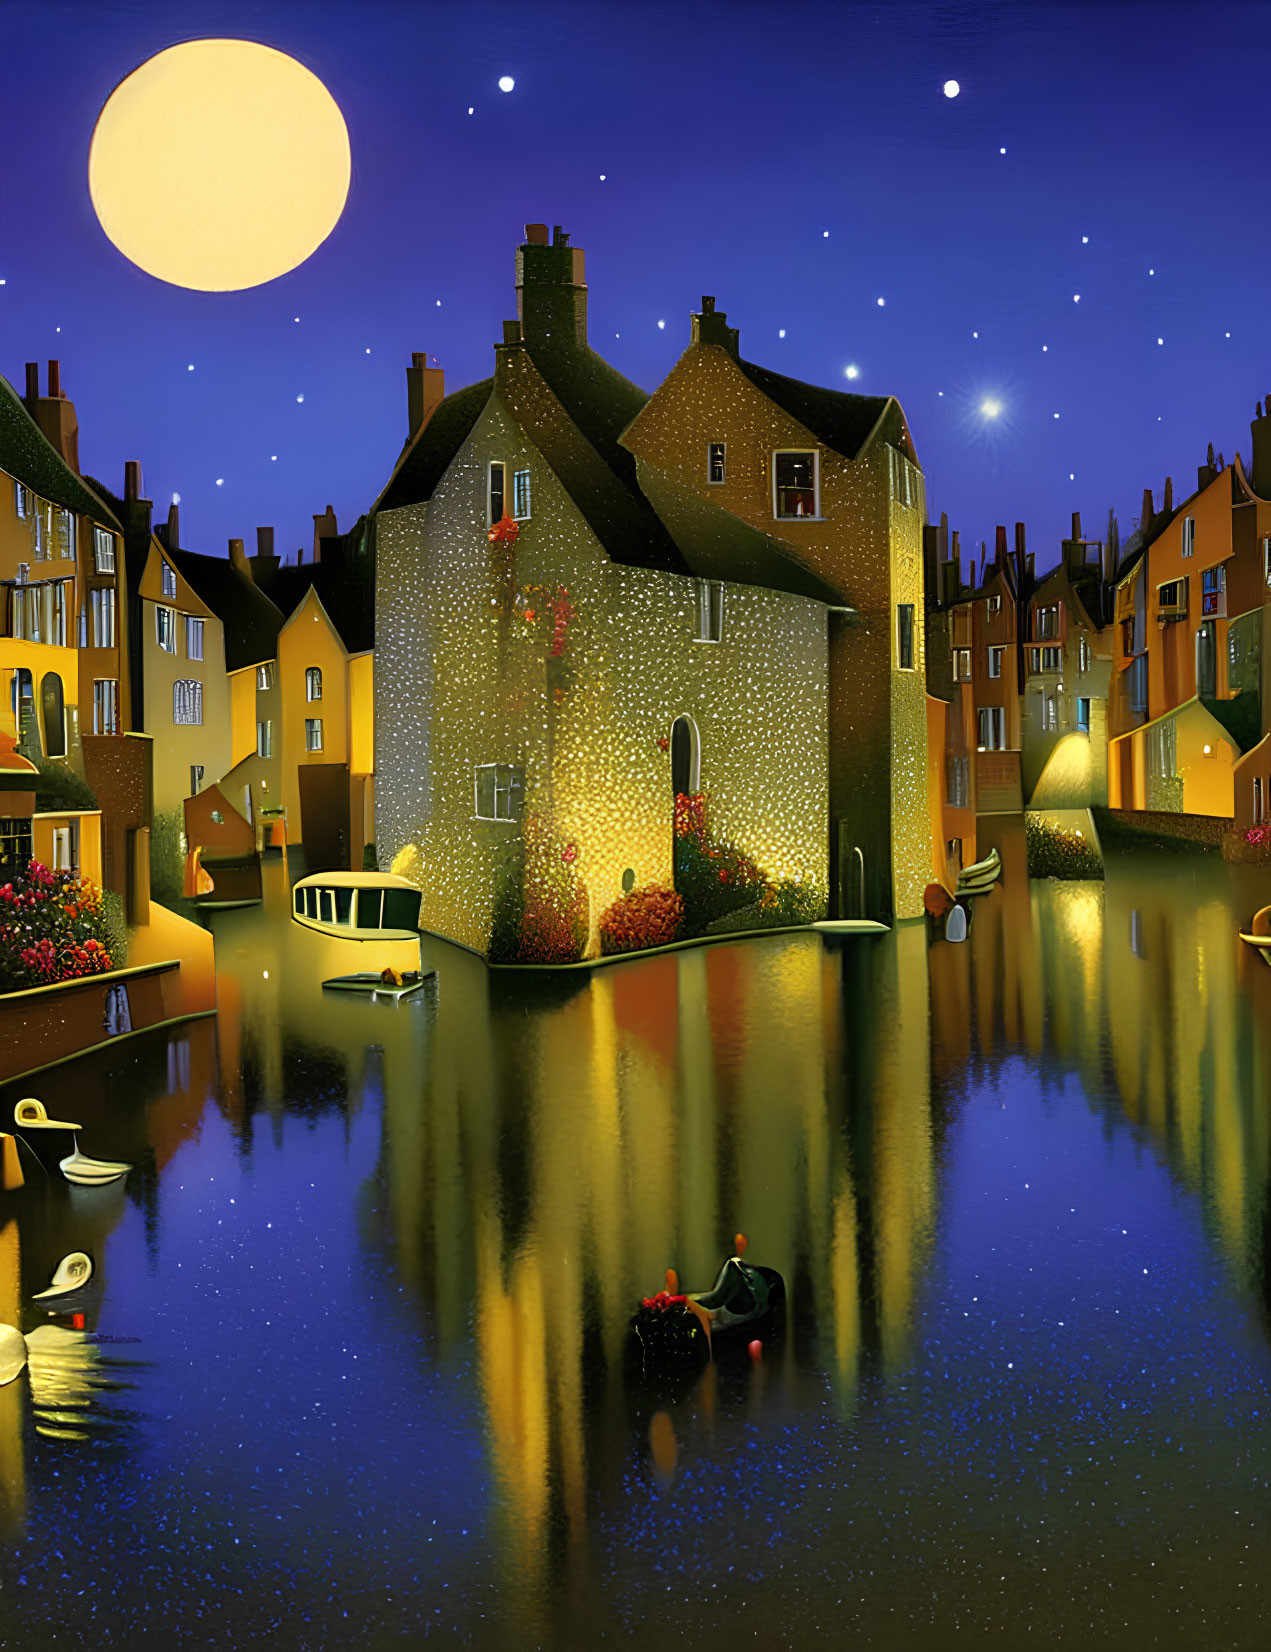 Vibrant riverside village painting with illuminated buildings, boat, moon, and stars.